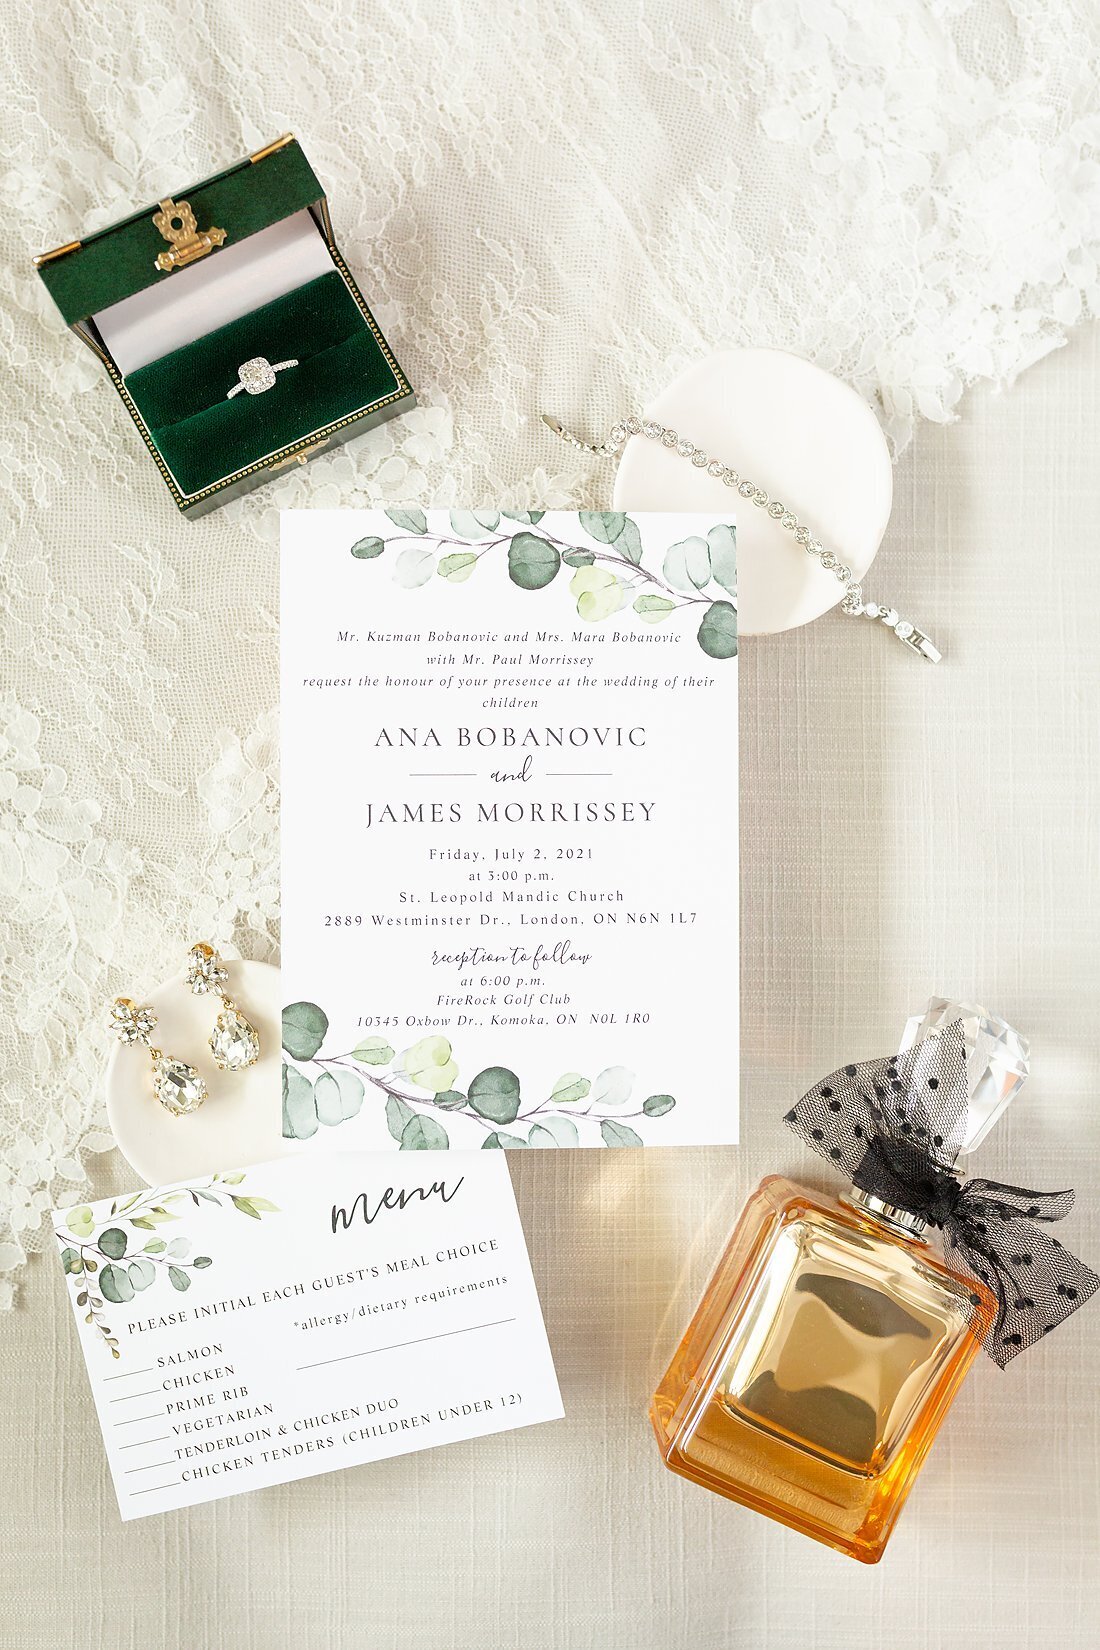 Bridal-wedding-details-and-invitation-on-top-of-the-wedding-dress